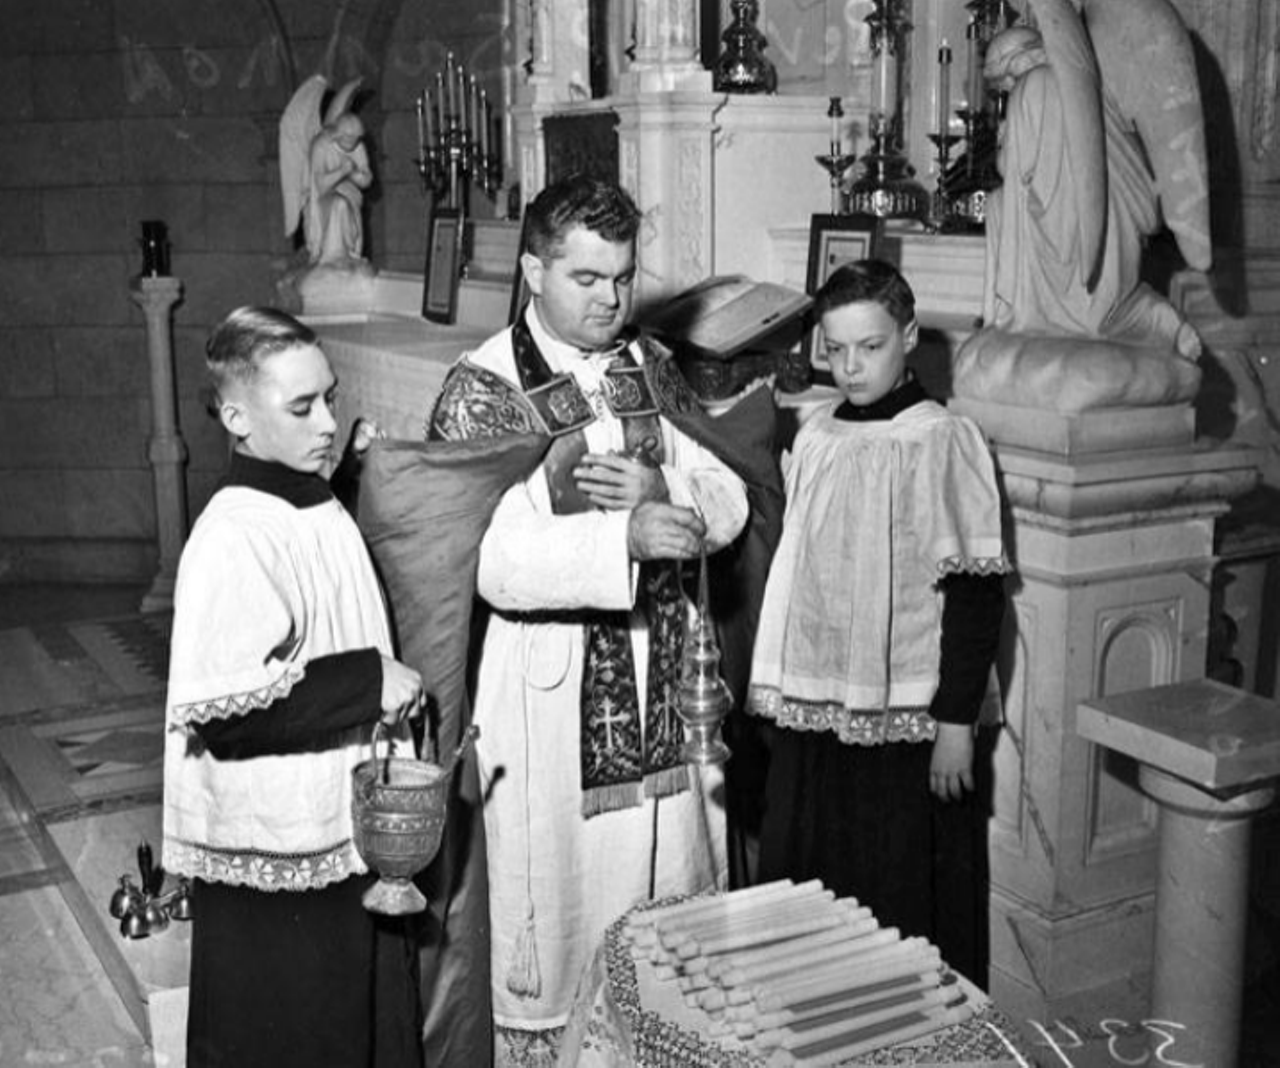 In this photo from the late 1940s, you can see Rev. Joseph P. Sammon of St. Mary's Catholic Church blessing the candles, with the assistance of two altar bars, in a ceremony known as "Candlemas." The event marked the end of the Christmas religious season for the church.